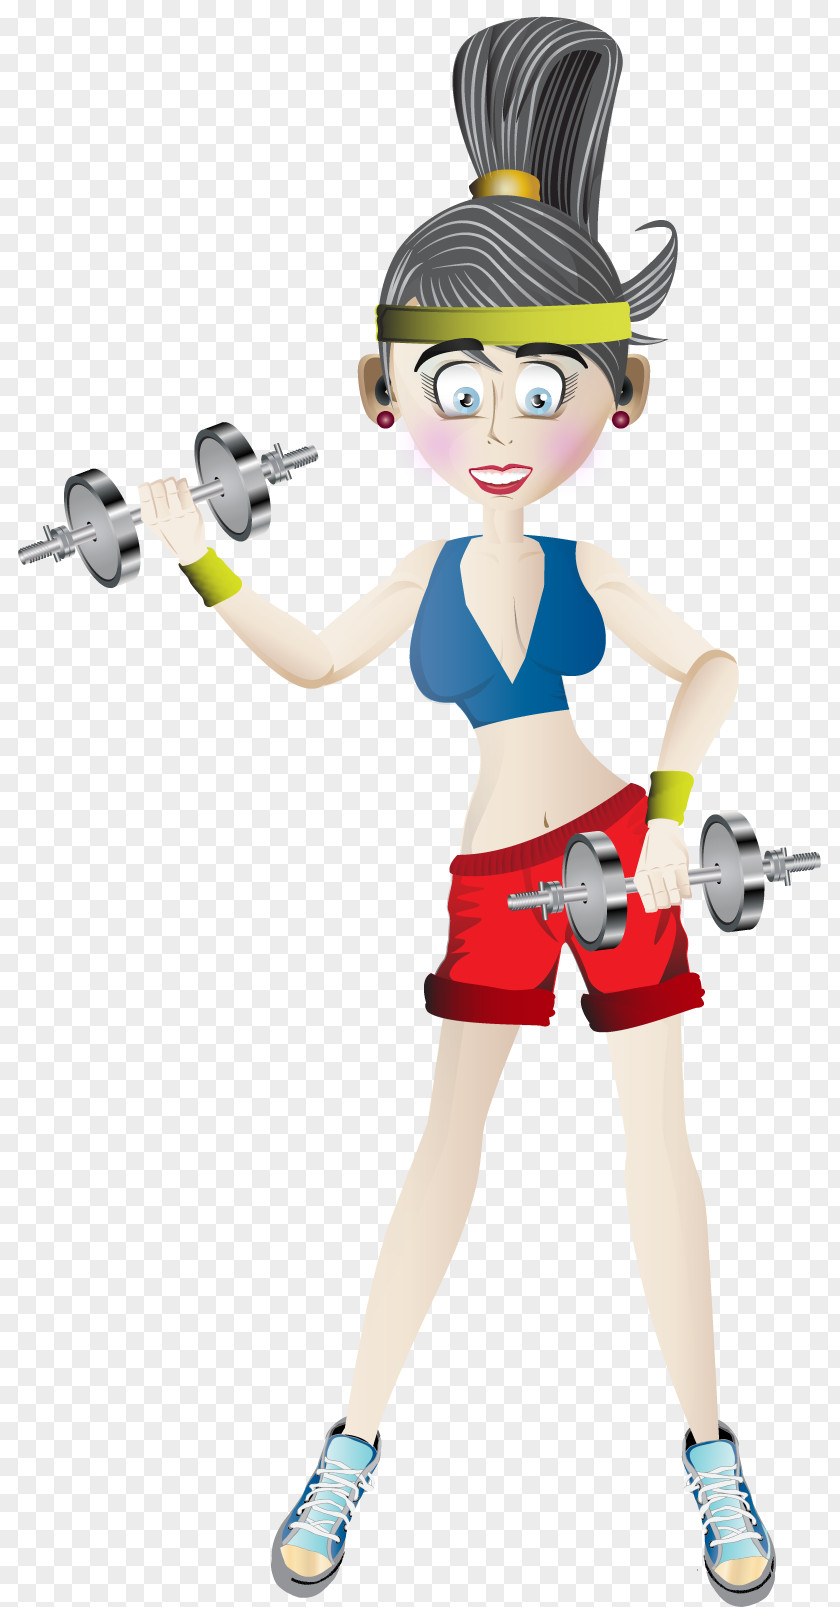 Dumbbell Fitness Beauty Aerobic Exercise Physical Weight Training Centre PNG